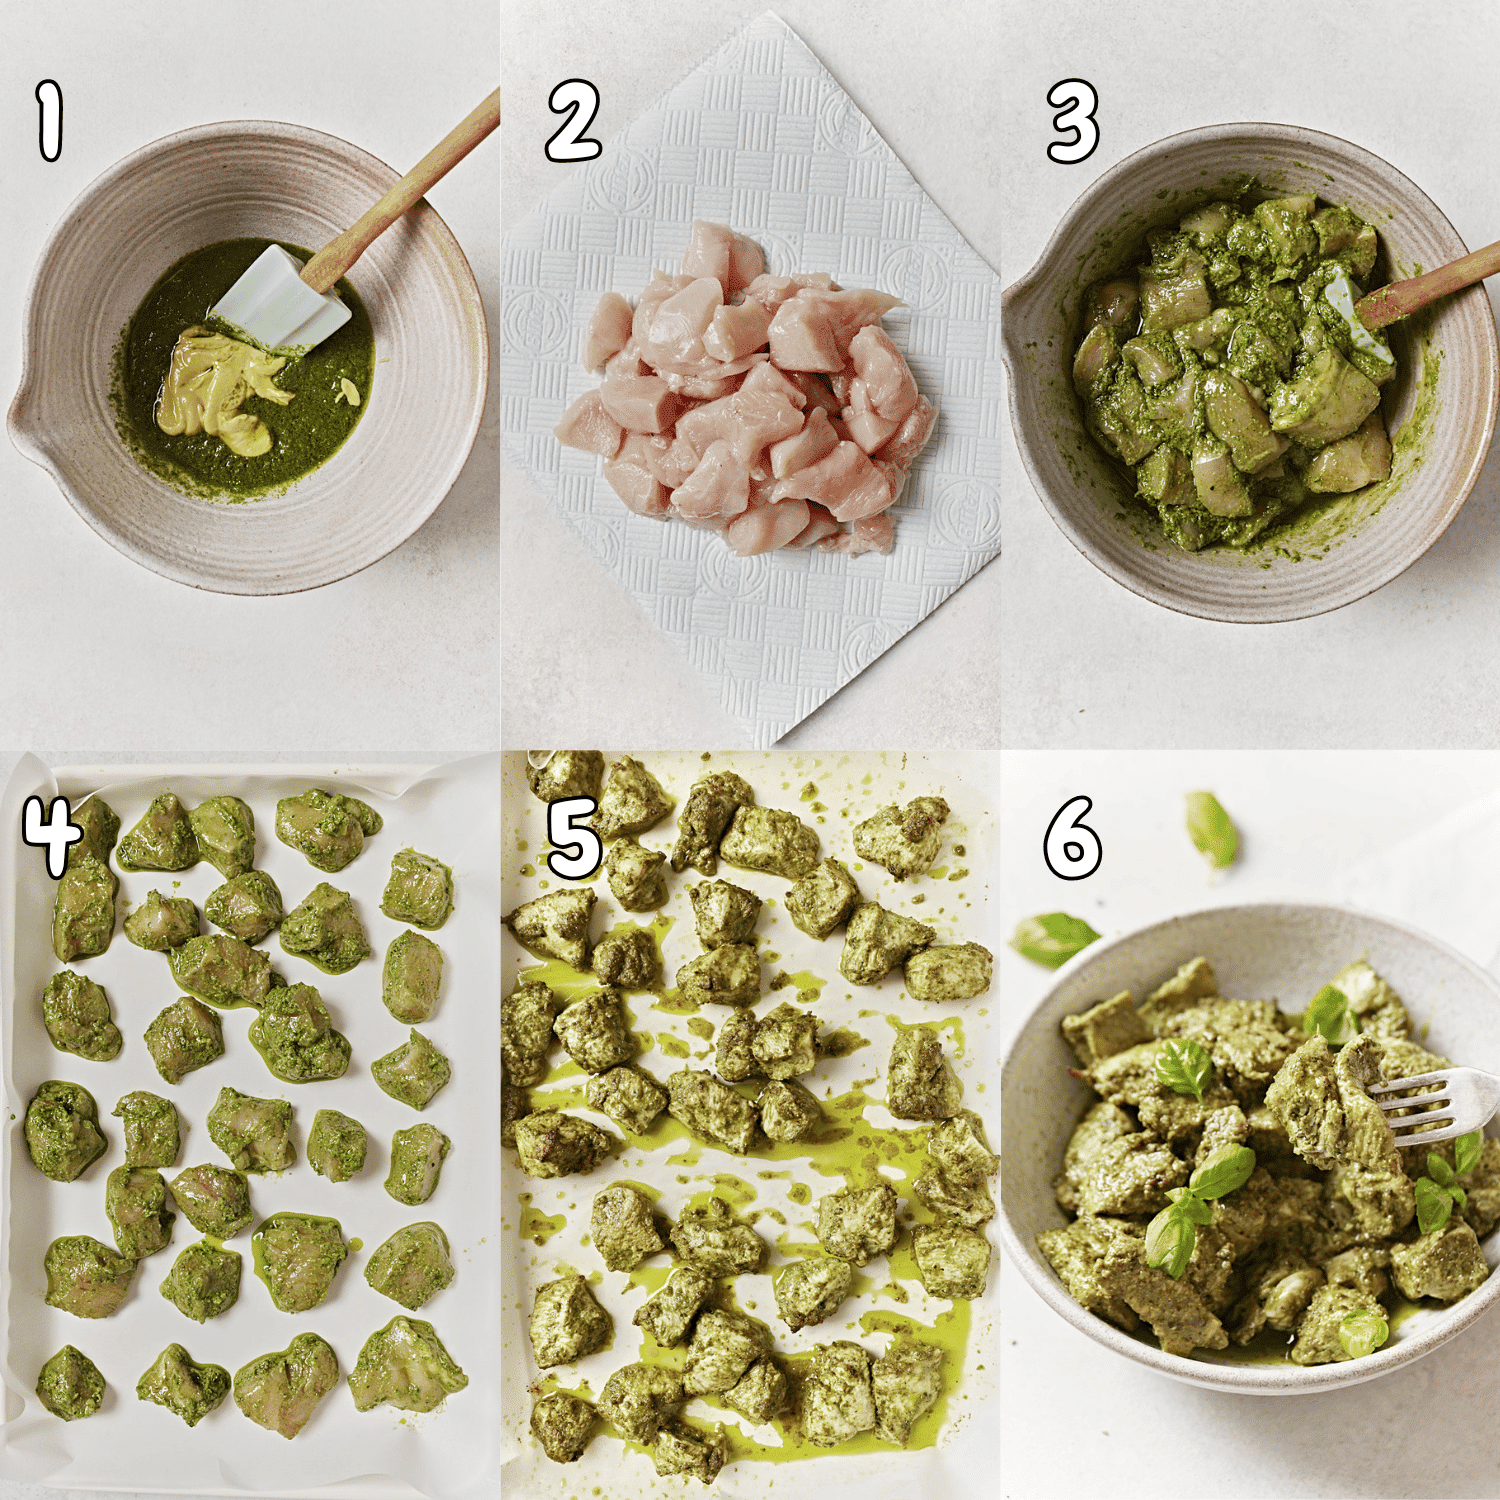 6-step collage showing how to make basil pesto chicken.